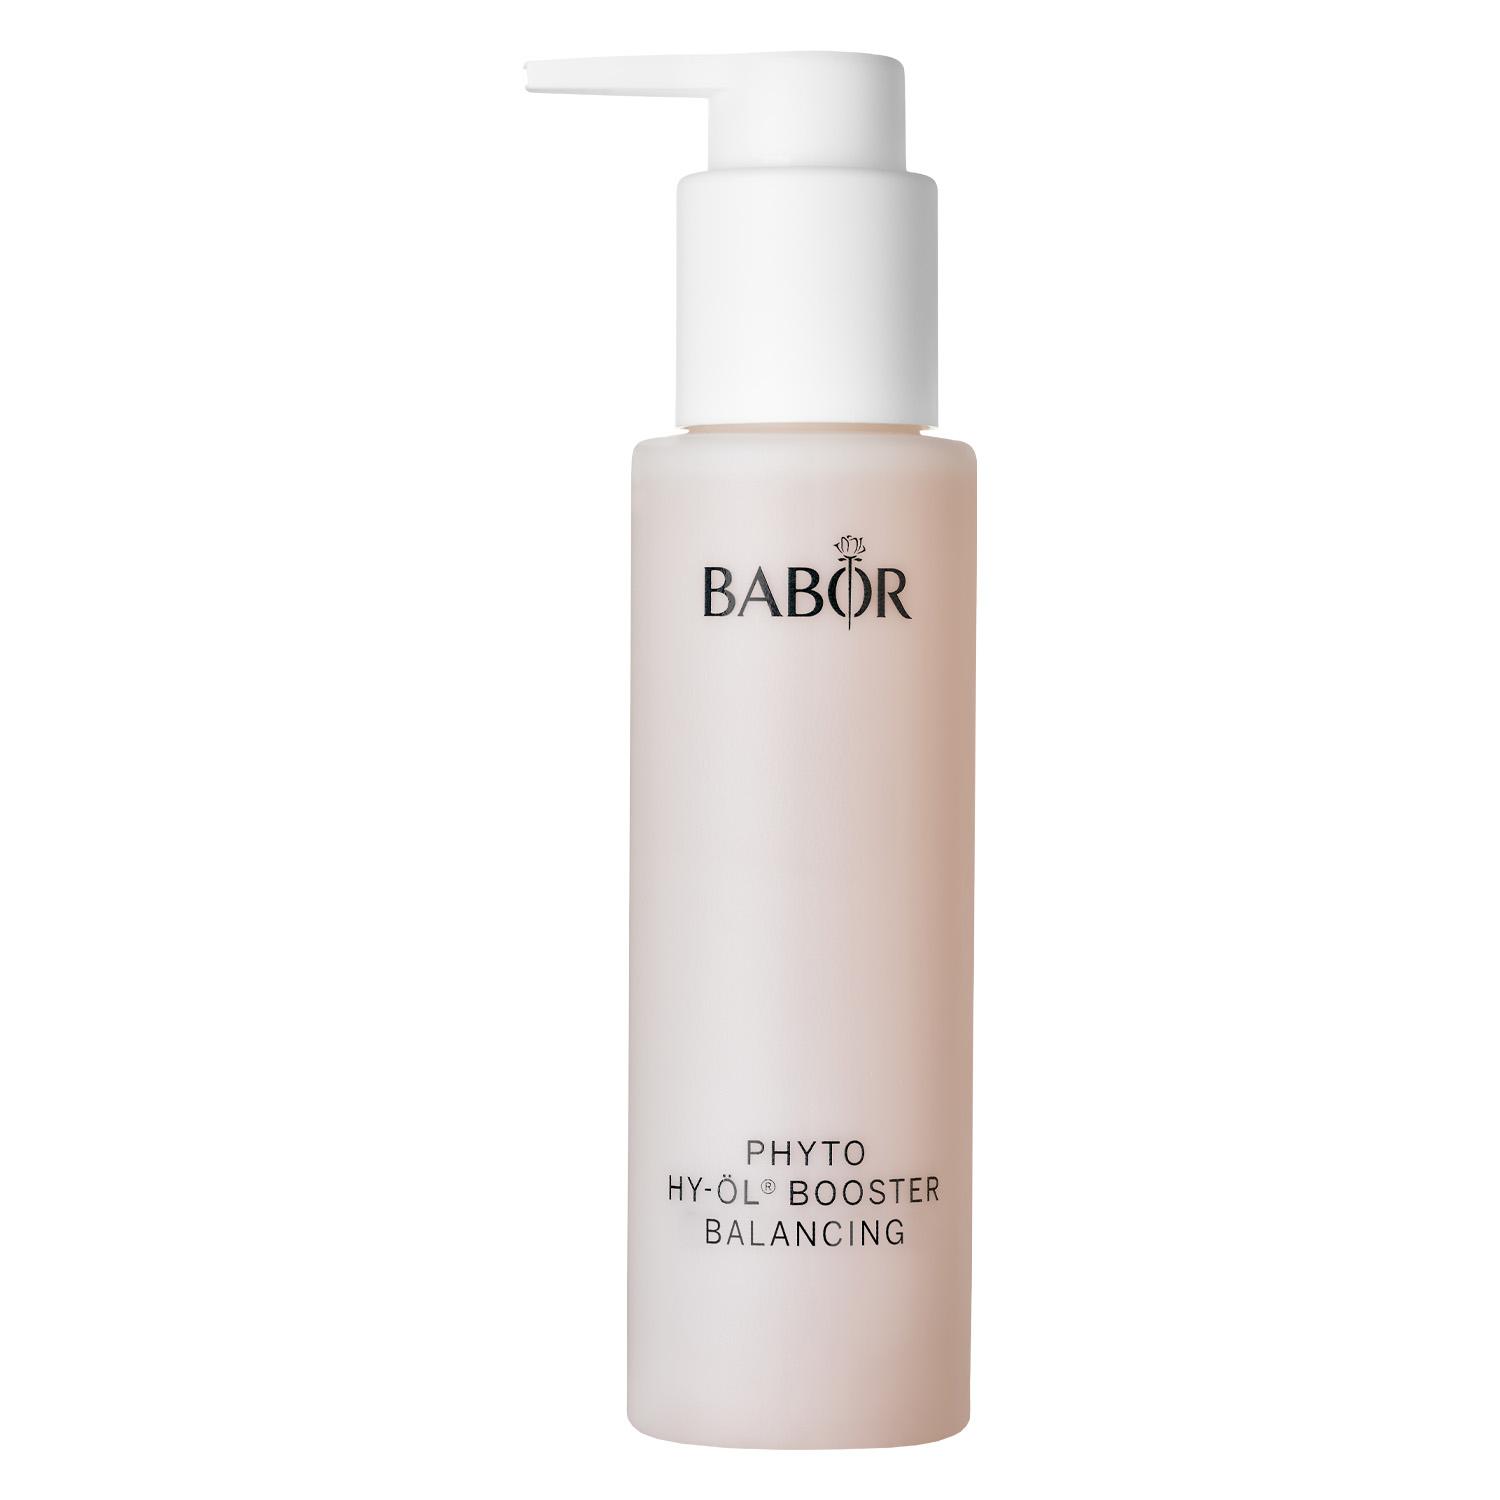 BABOR CLEANSING - Phyto HY-ÖL® Booster Balancing